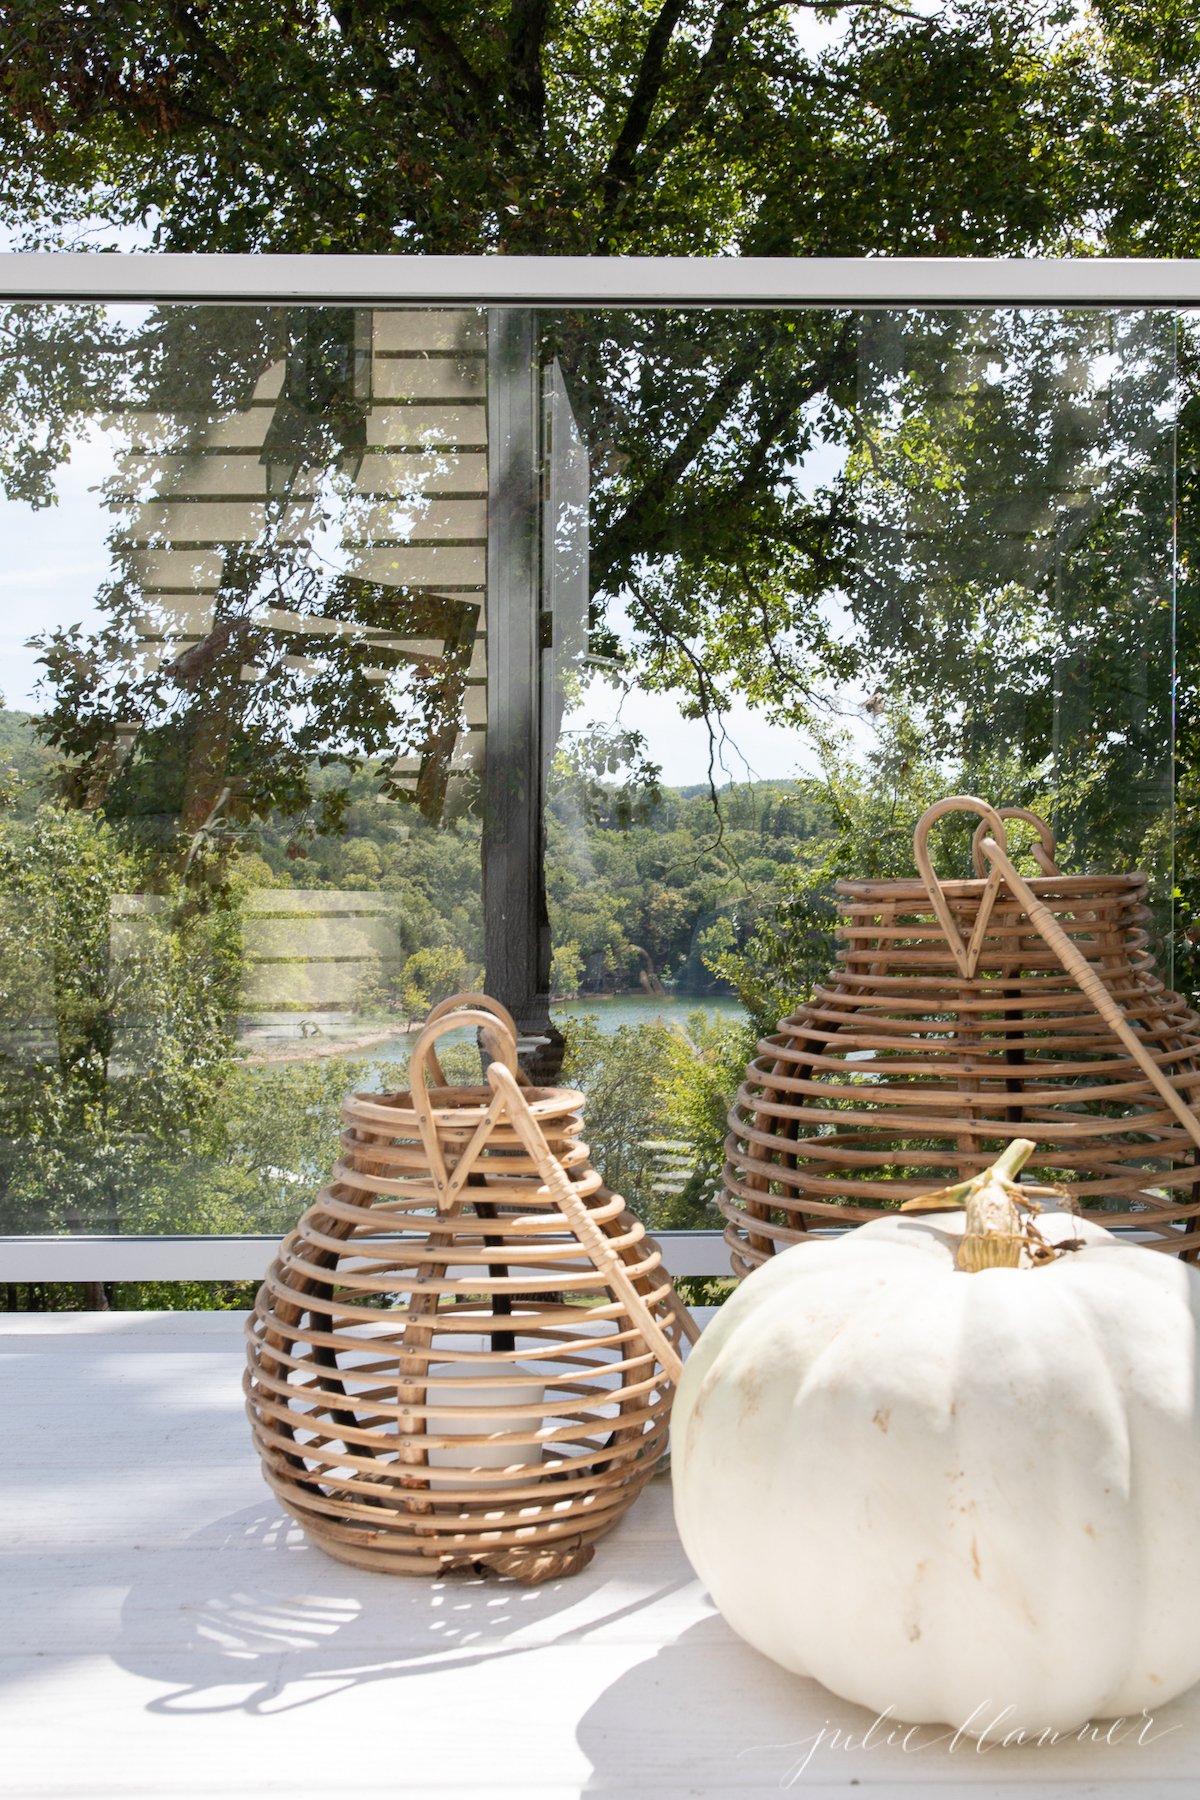 A white pumpkin sits on a table adorned with minimalist fall decor, next to two wicker baskets.